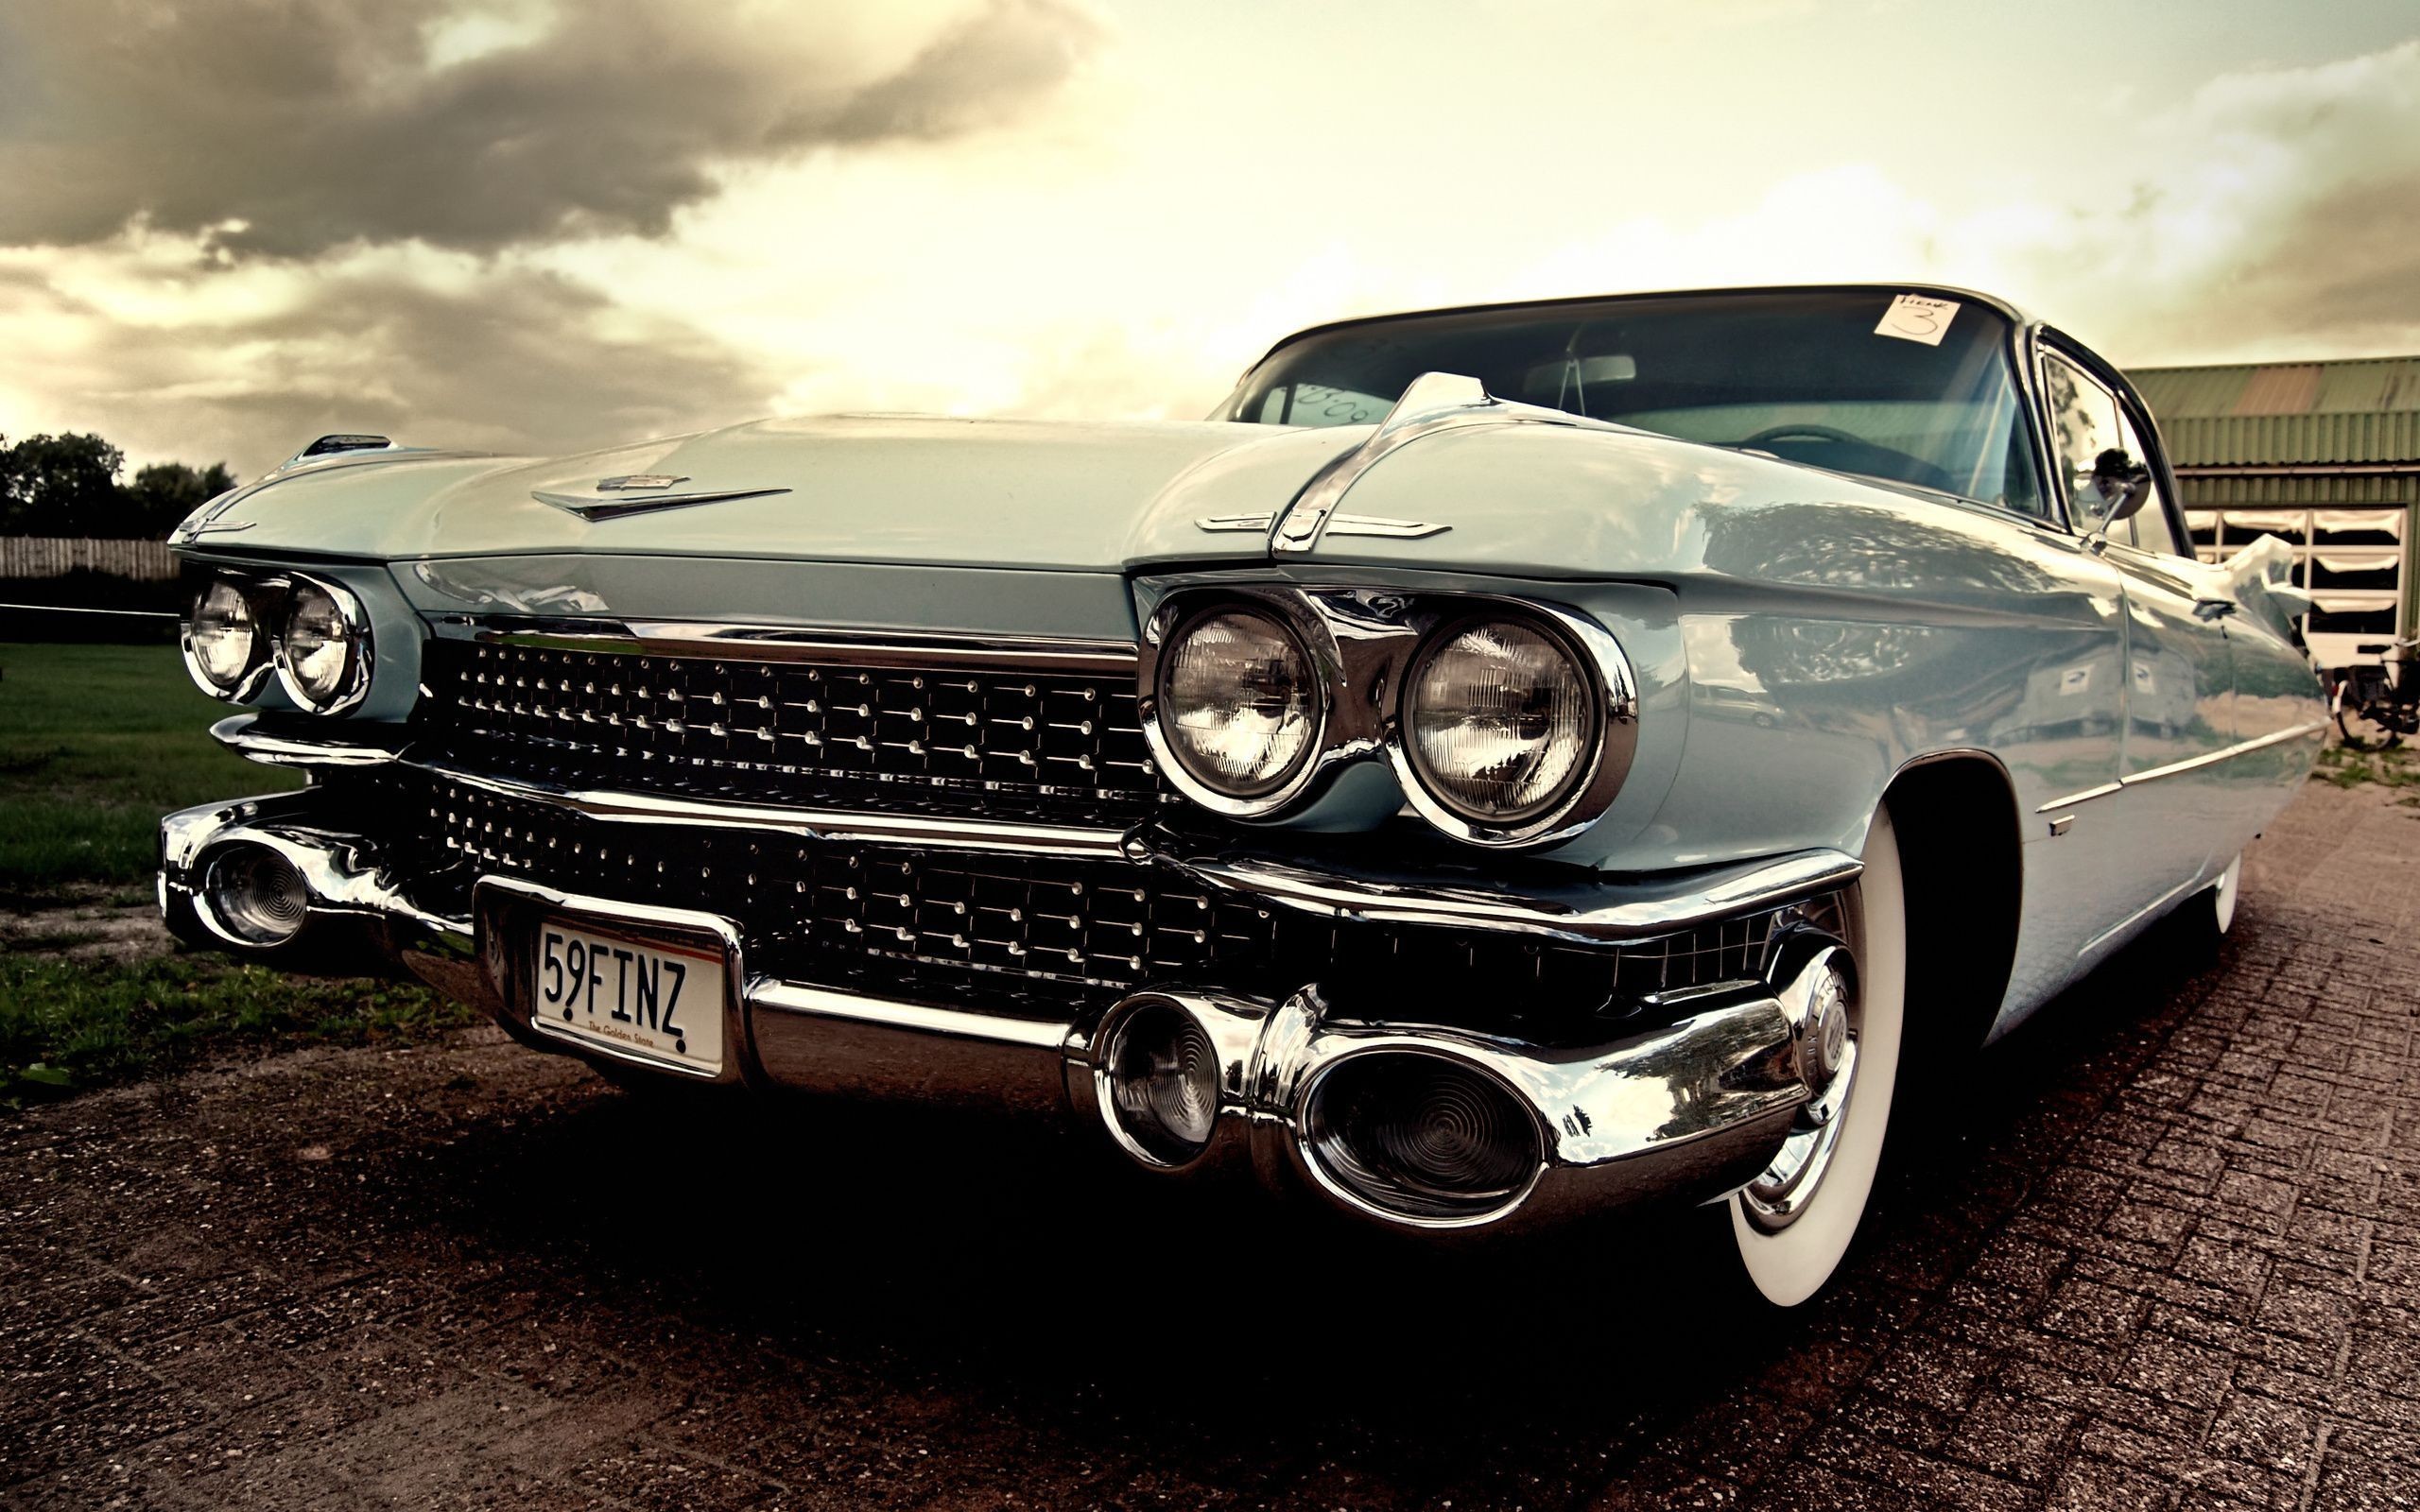 2560x1600 Permalink to Classic Cars Wallpapers Hd